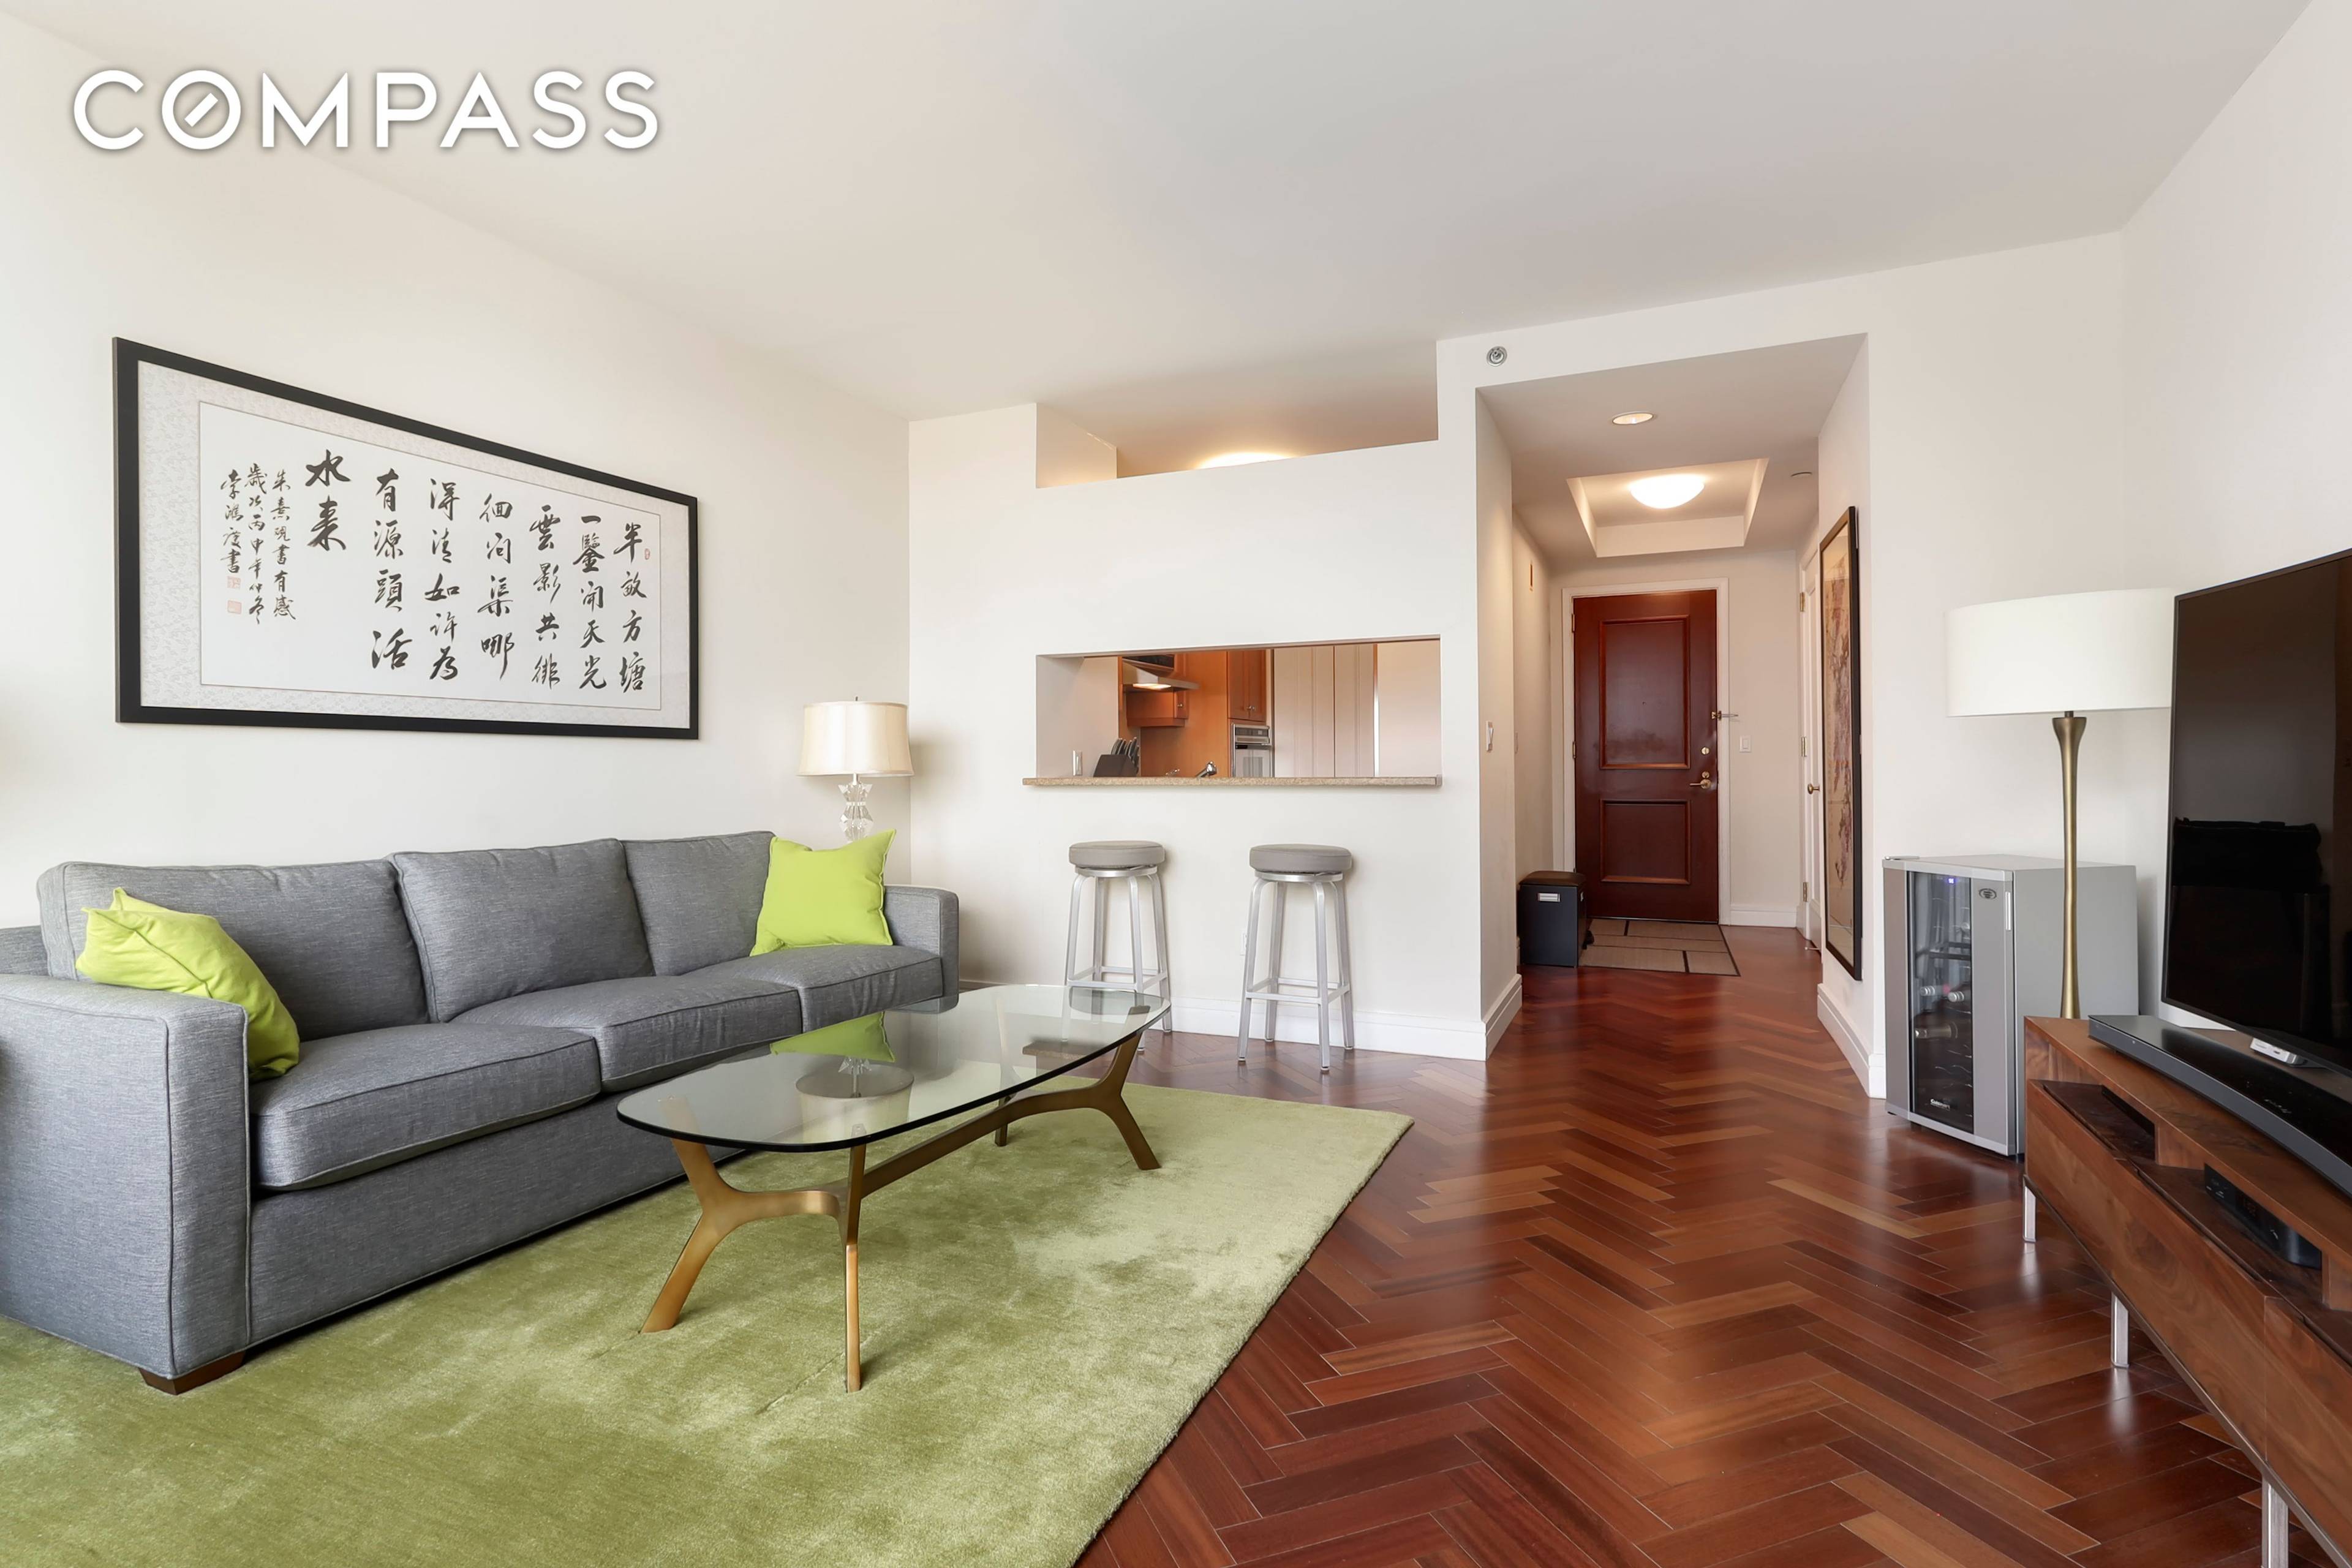 Beautiful views of the Hudson River abound from this elegant and large 1 bedroom and 1.